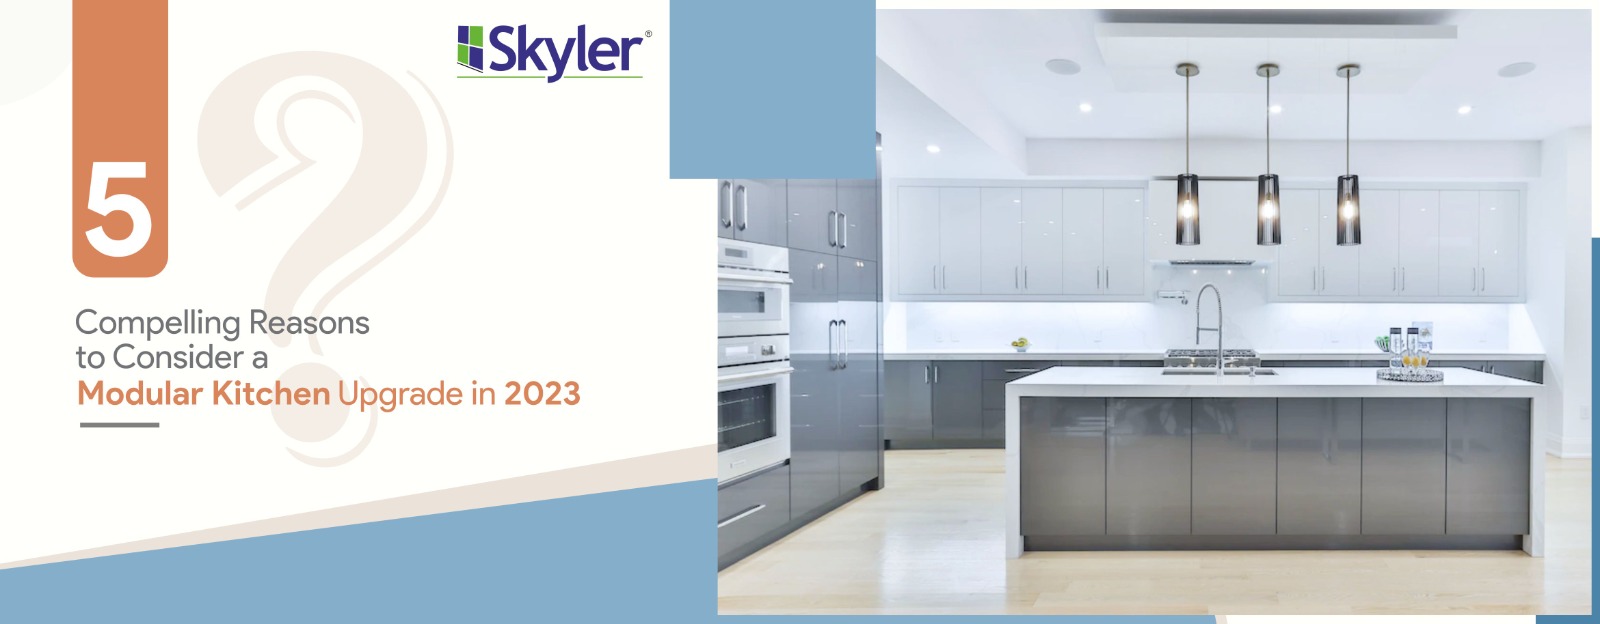 5 Compelling Reasons to Consider a Modular Kitchen Upgrade in 2023